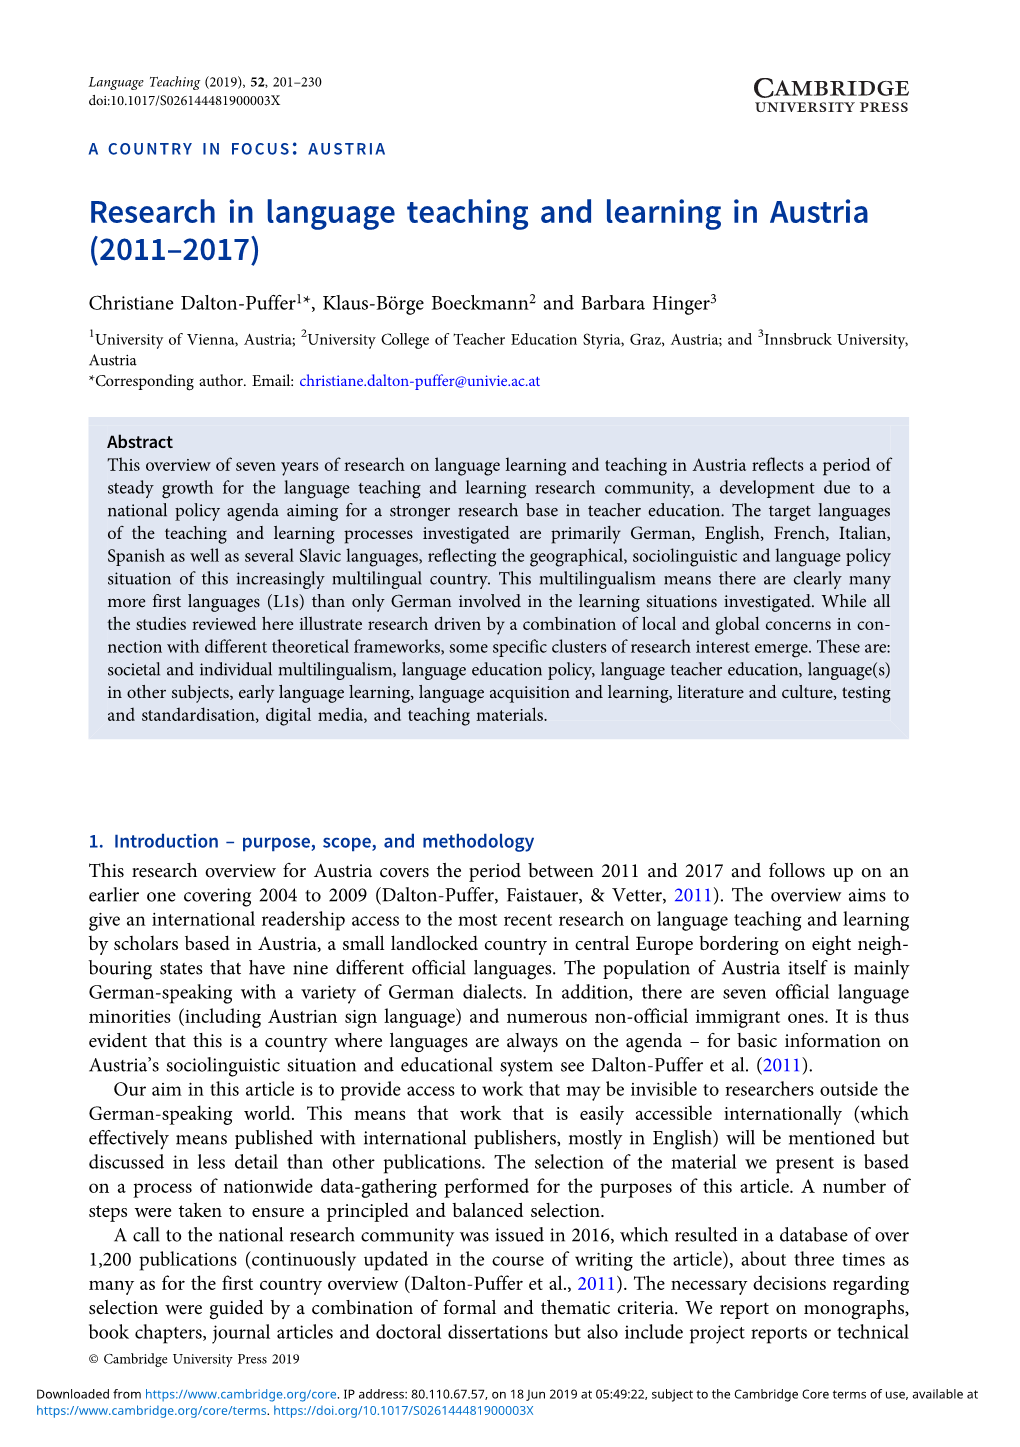 Research in Language Teaching and Learning in Austria (2011–2017)